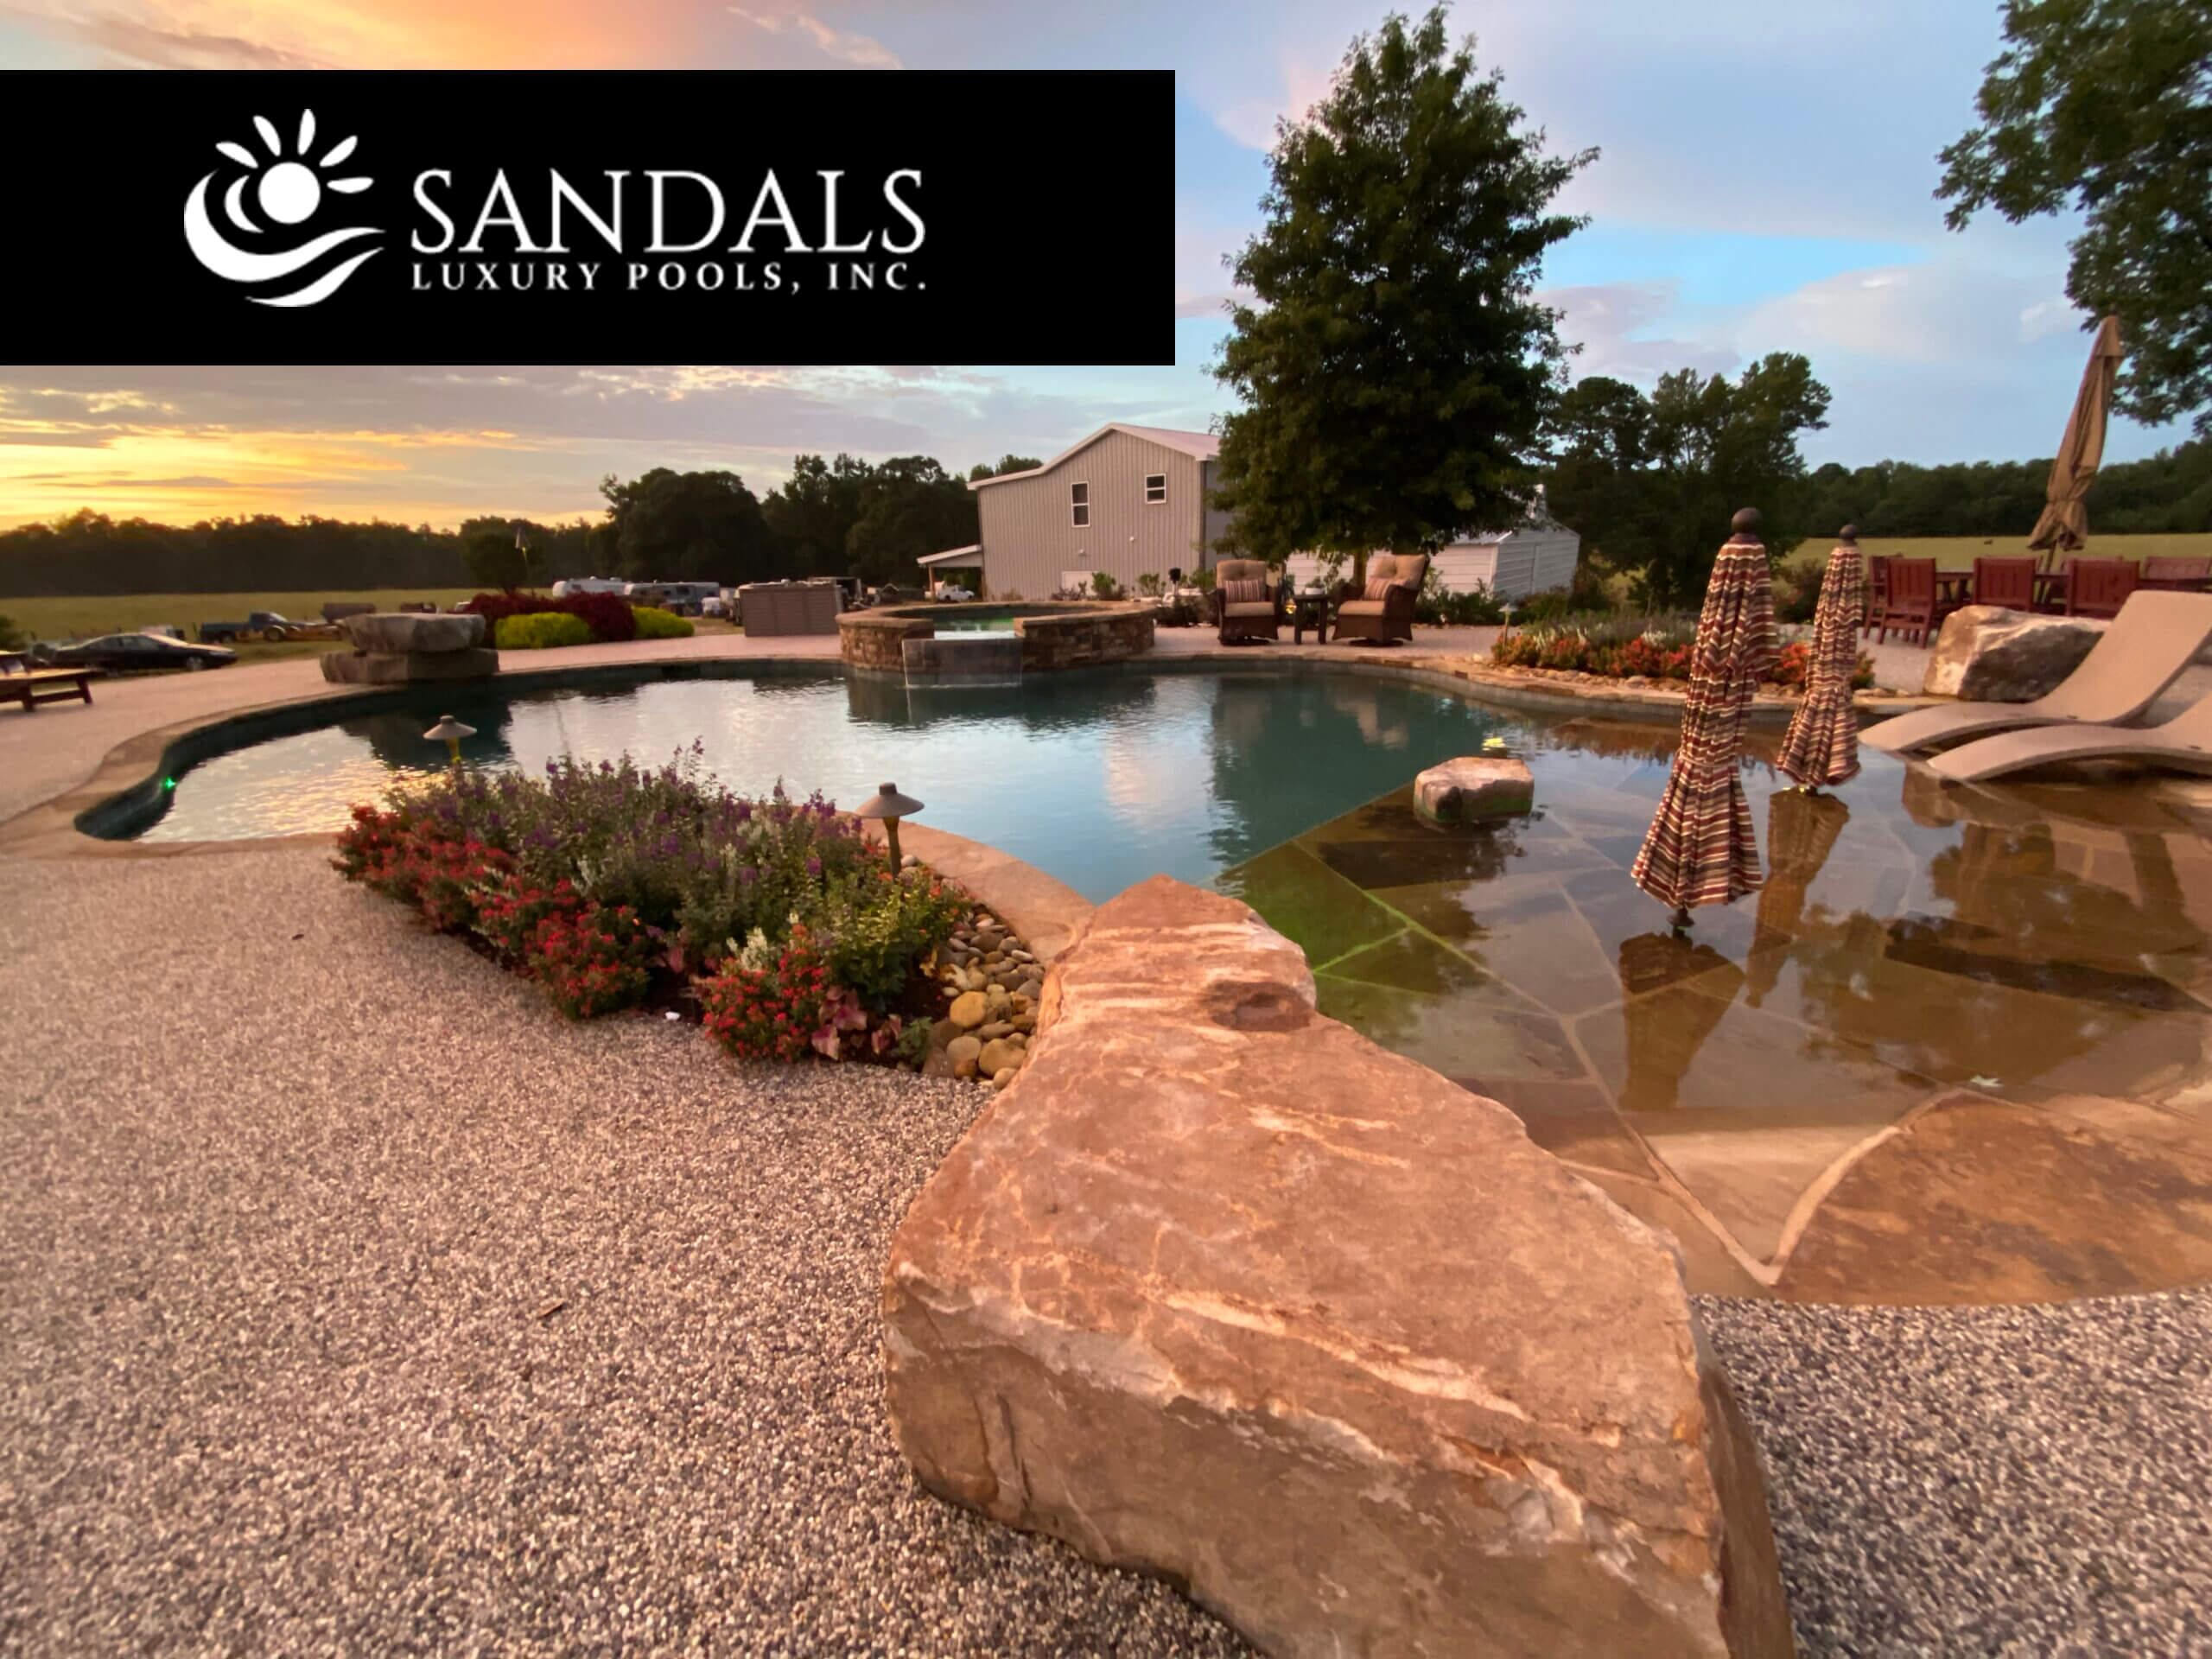 Top Rated Atlanta Pool Builder, Sandals Luxury Pools, Encourages Clients: Now Is The Time To Build